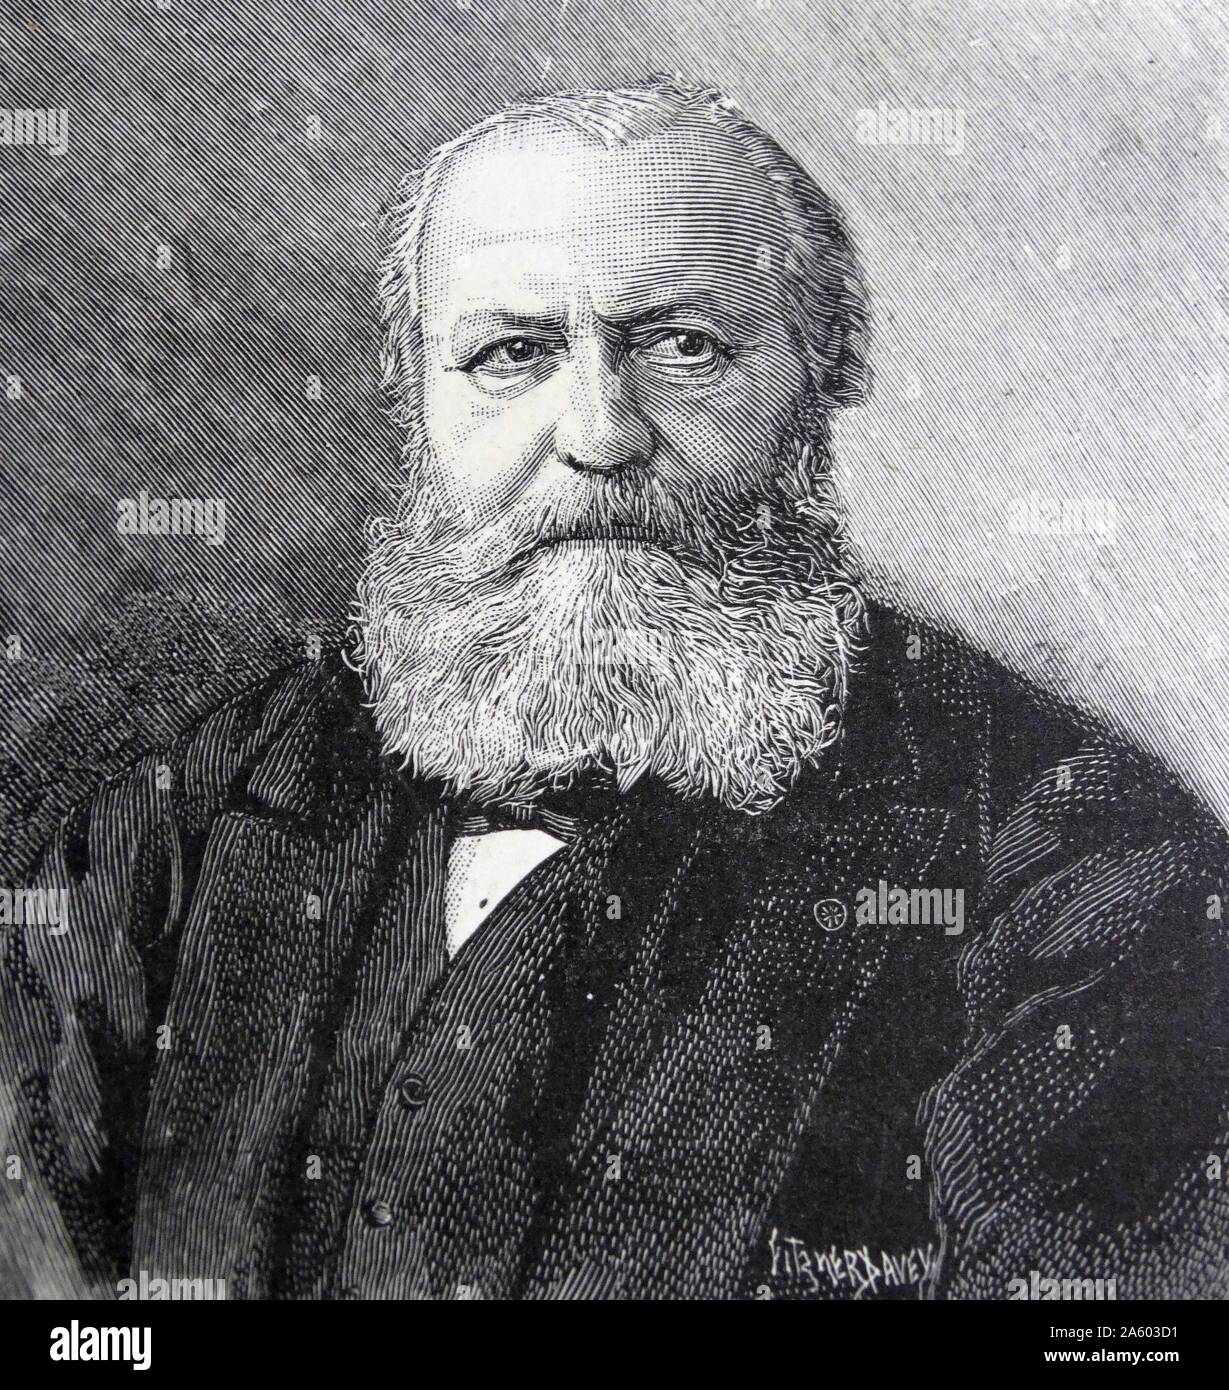 Portrait of Charles-François Gounod (1818-1893) a French composer, known for his Ave Maria, based on a work by Bach, as well as his opera Faust. Dated 19th Century Stock Photo